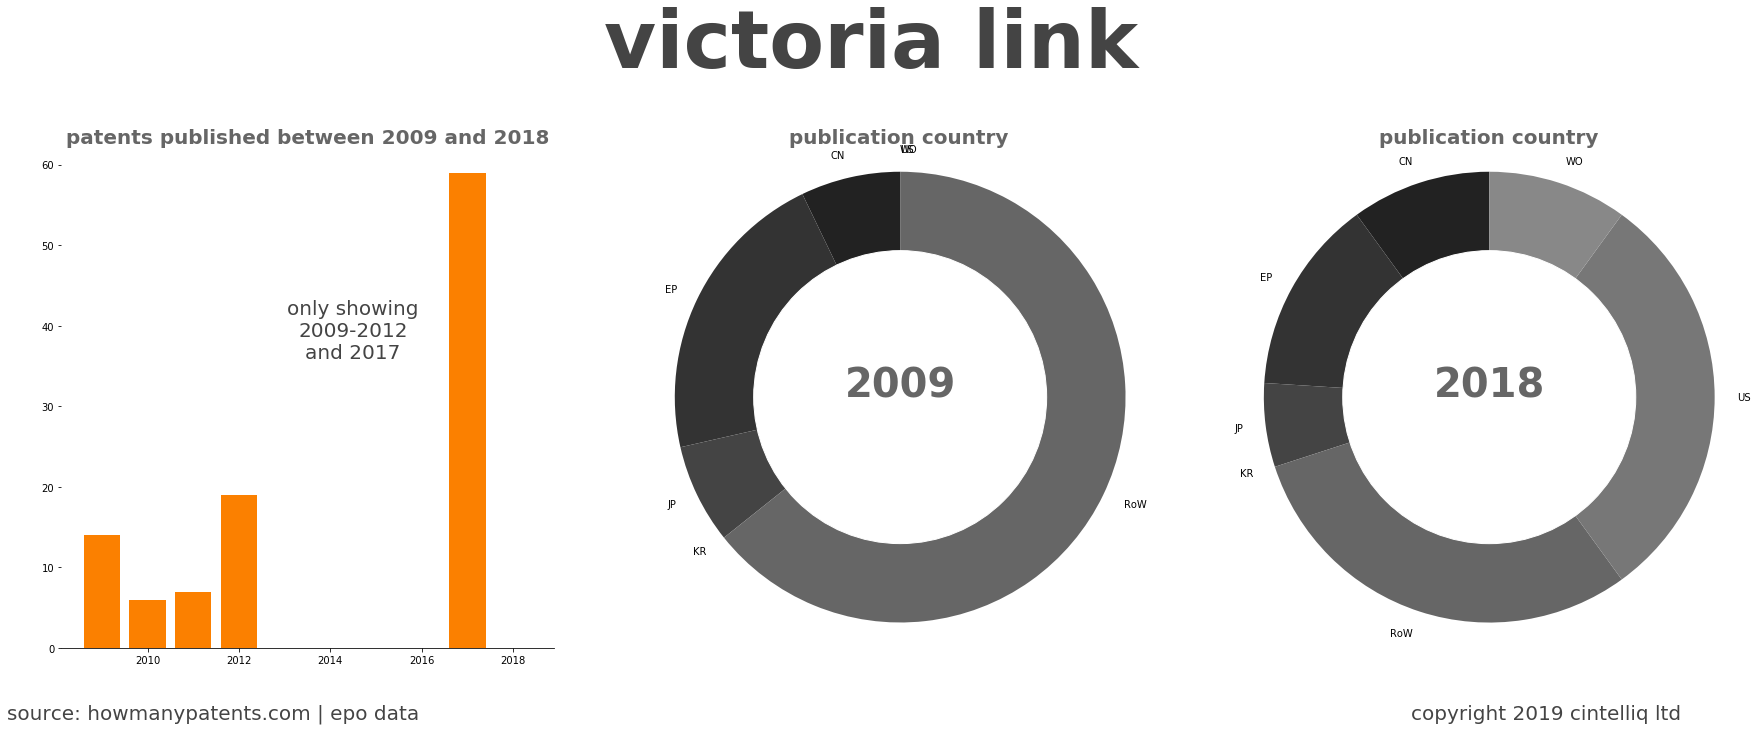 summary of patents for Victoria Link